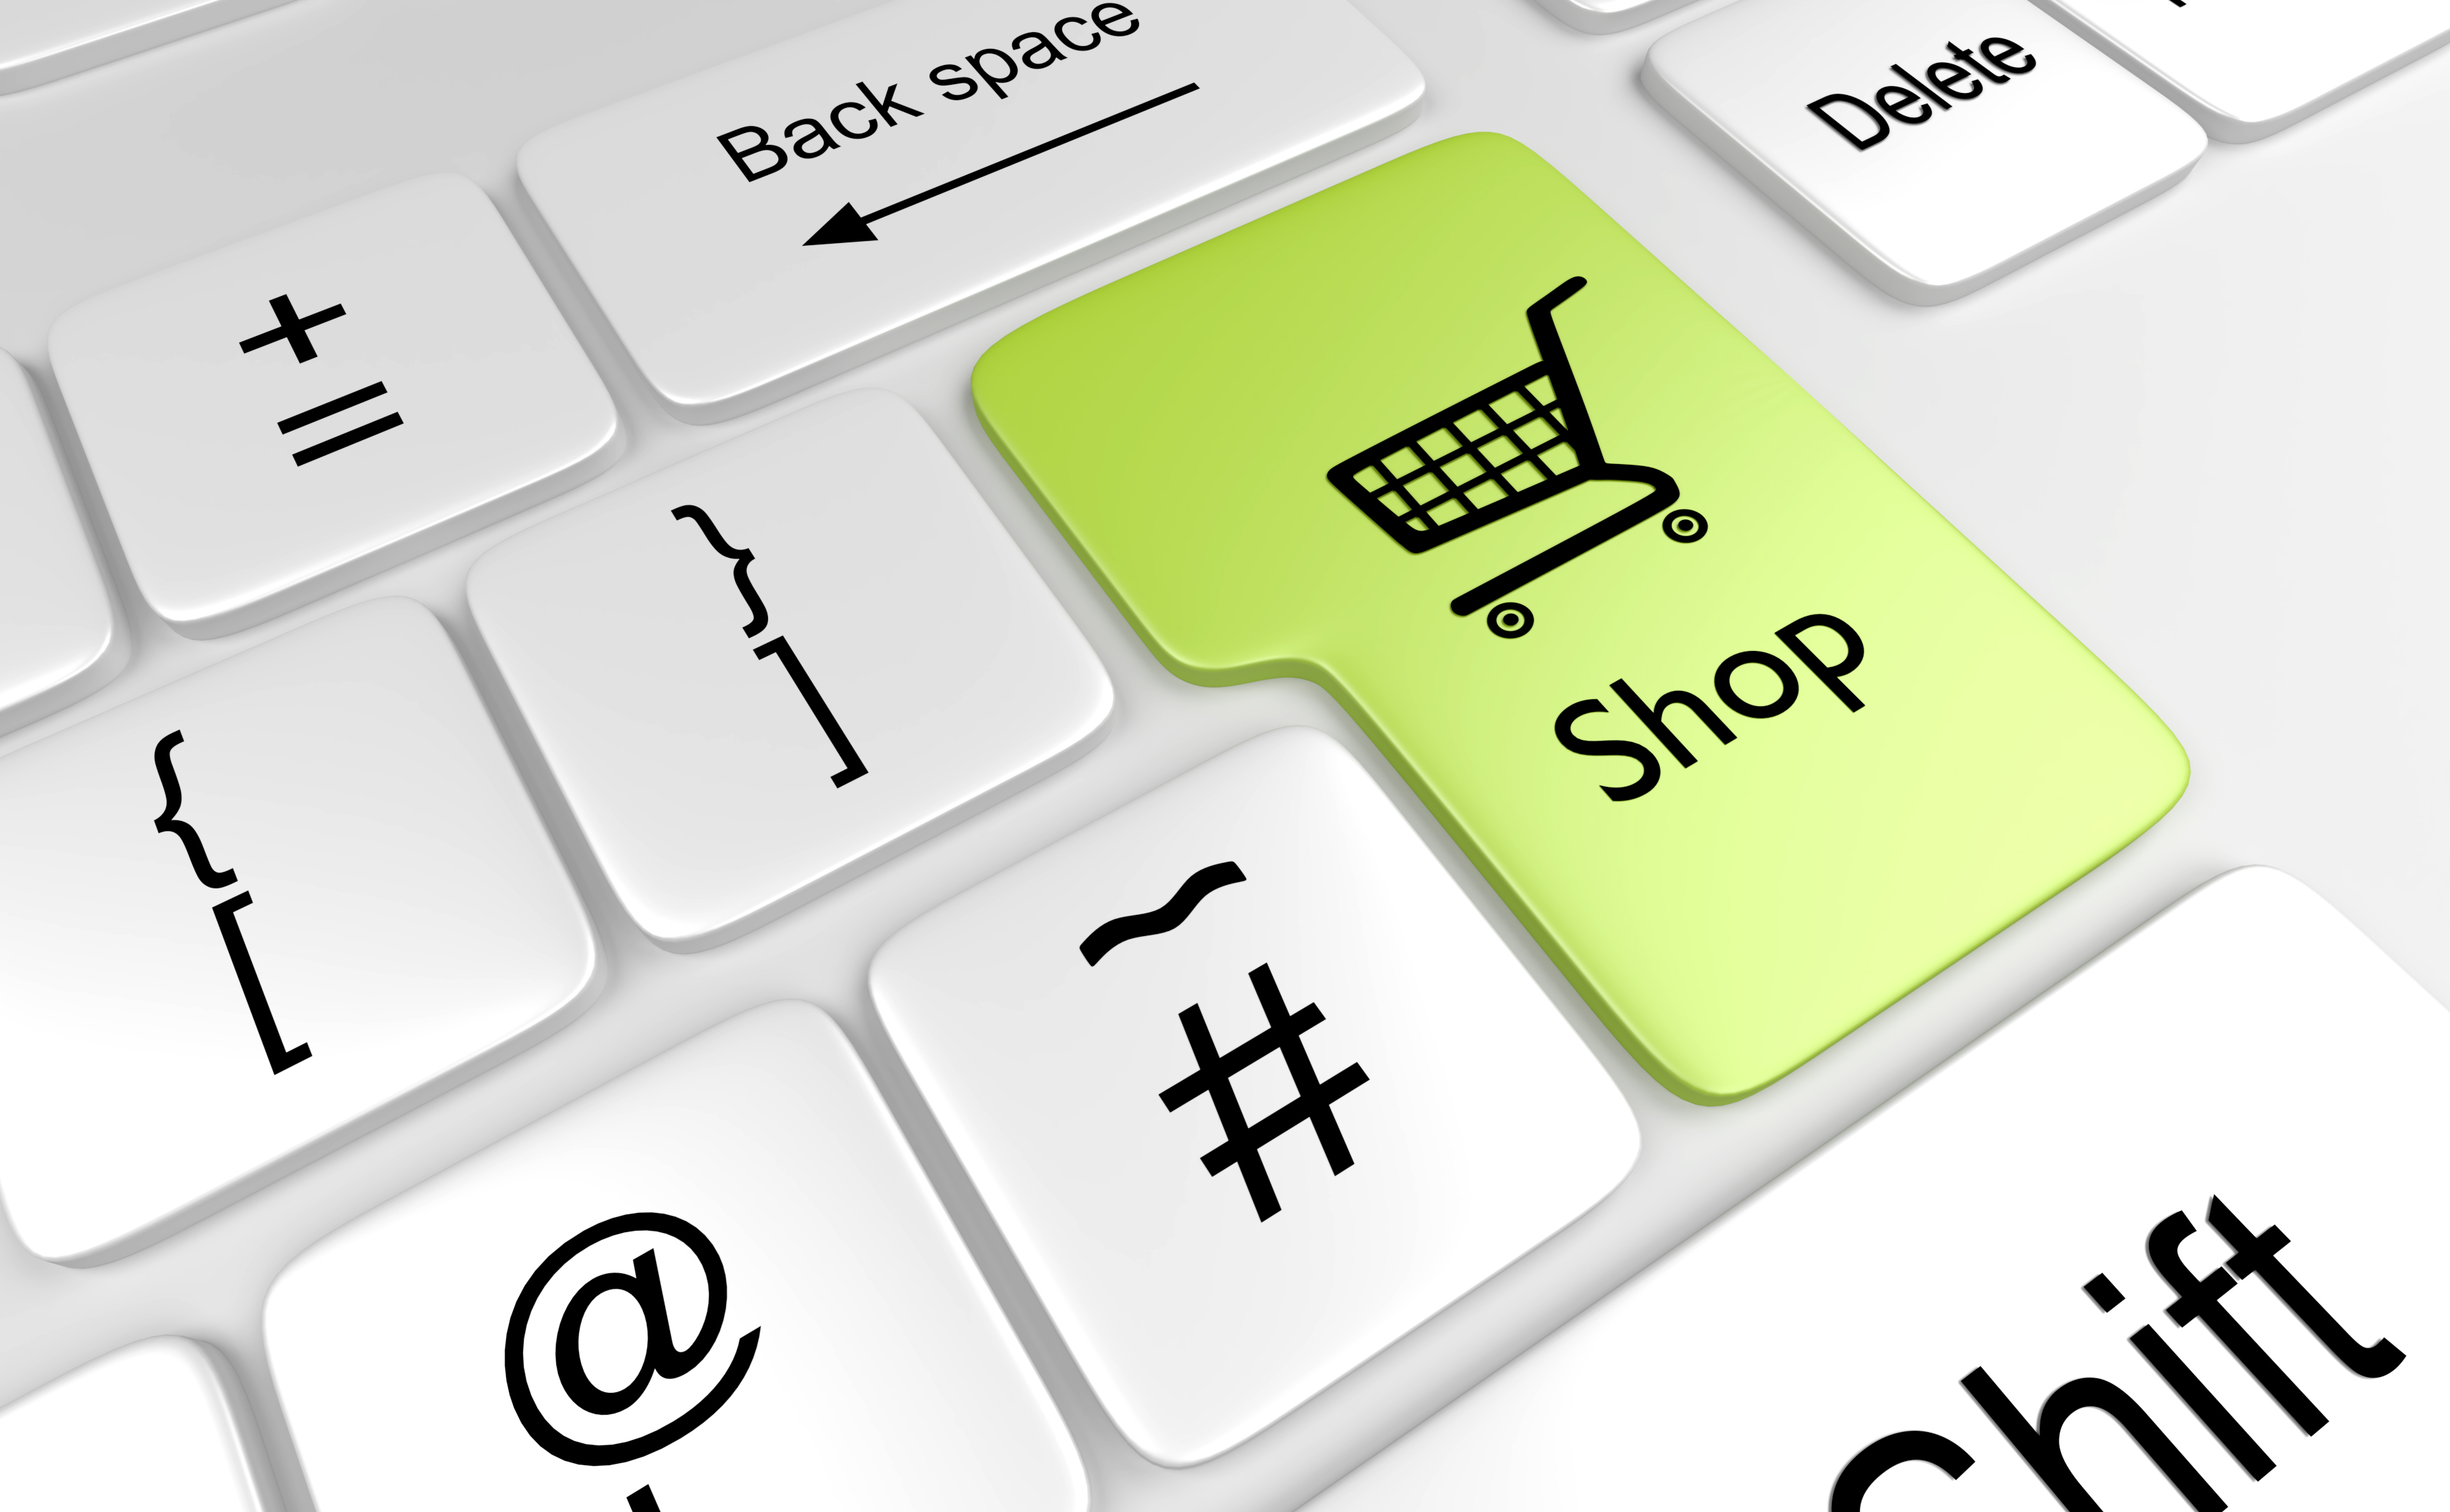 online-shopping-computer-keyboard-commerce-shopping-cart-shopping-computer-key-1445129-pxhere.com.jpg